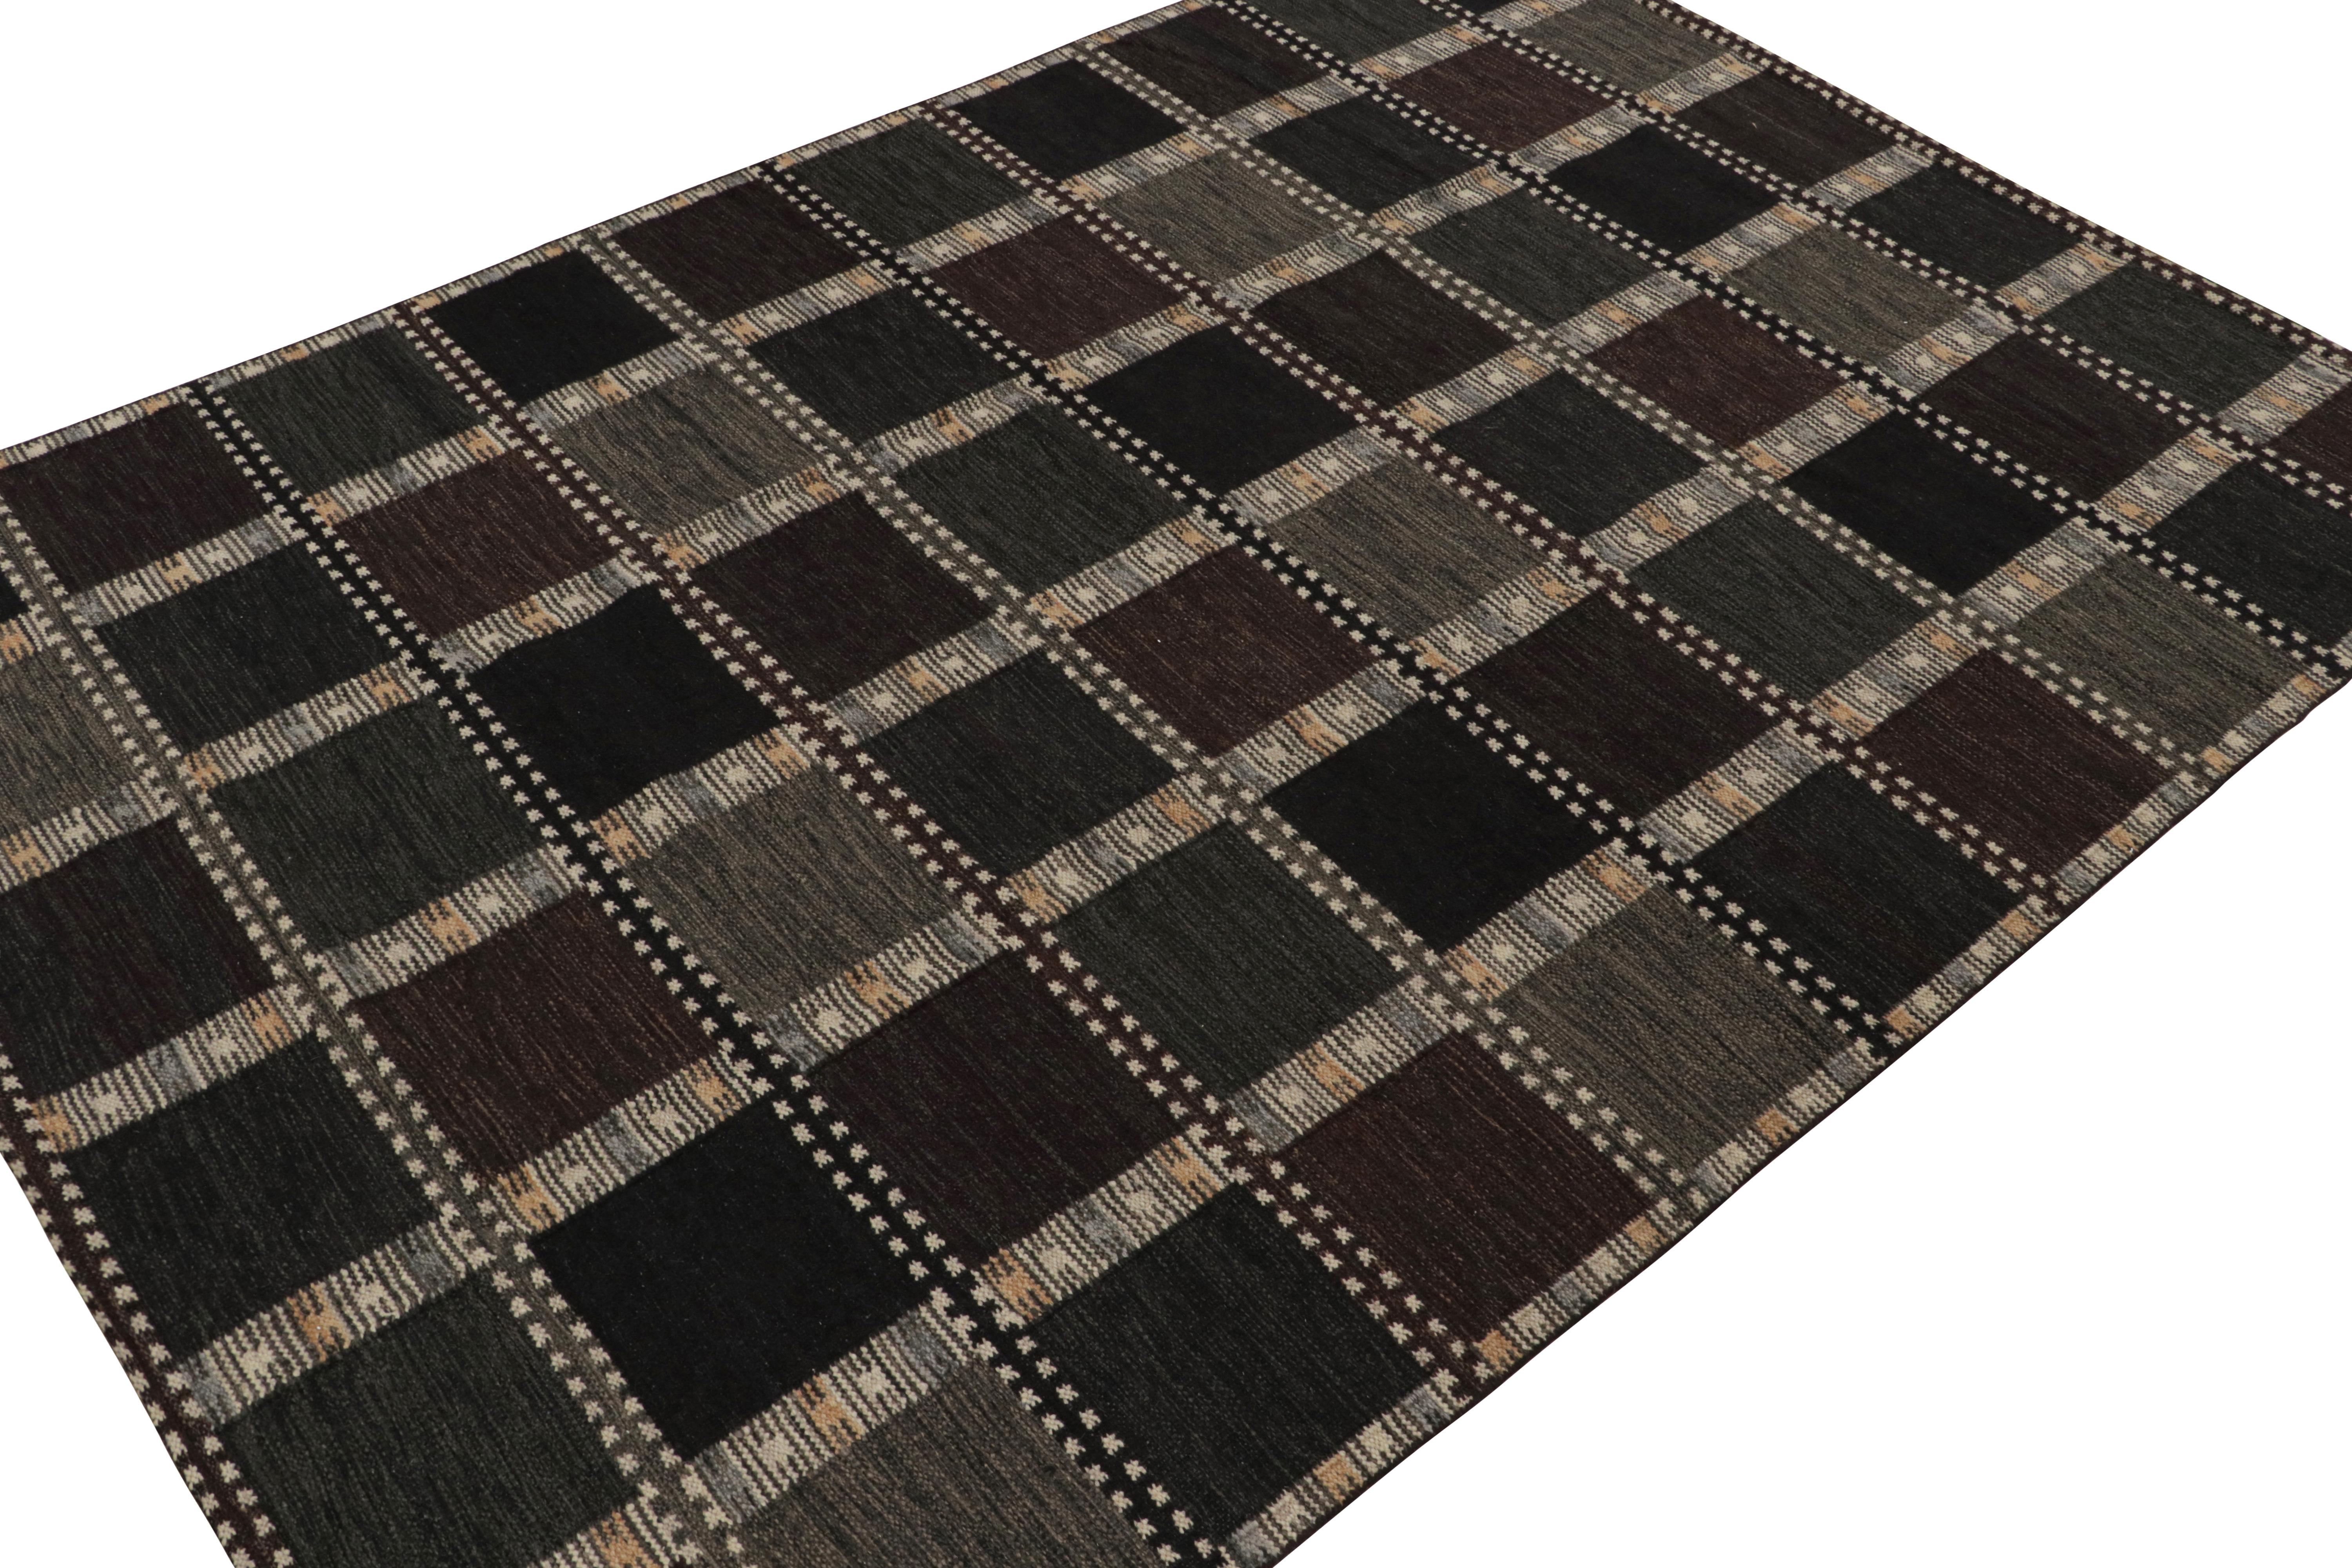 This 10x14 Swedish style kilim is from the award-winning Scandinavian flat weave collection by Rug & Kilim. 

Handwoven in wool and undyed, natural yarns, its design reflects a contemporary take on mid-century Rollakans and Swedish Deco style.

On